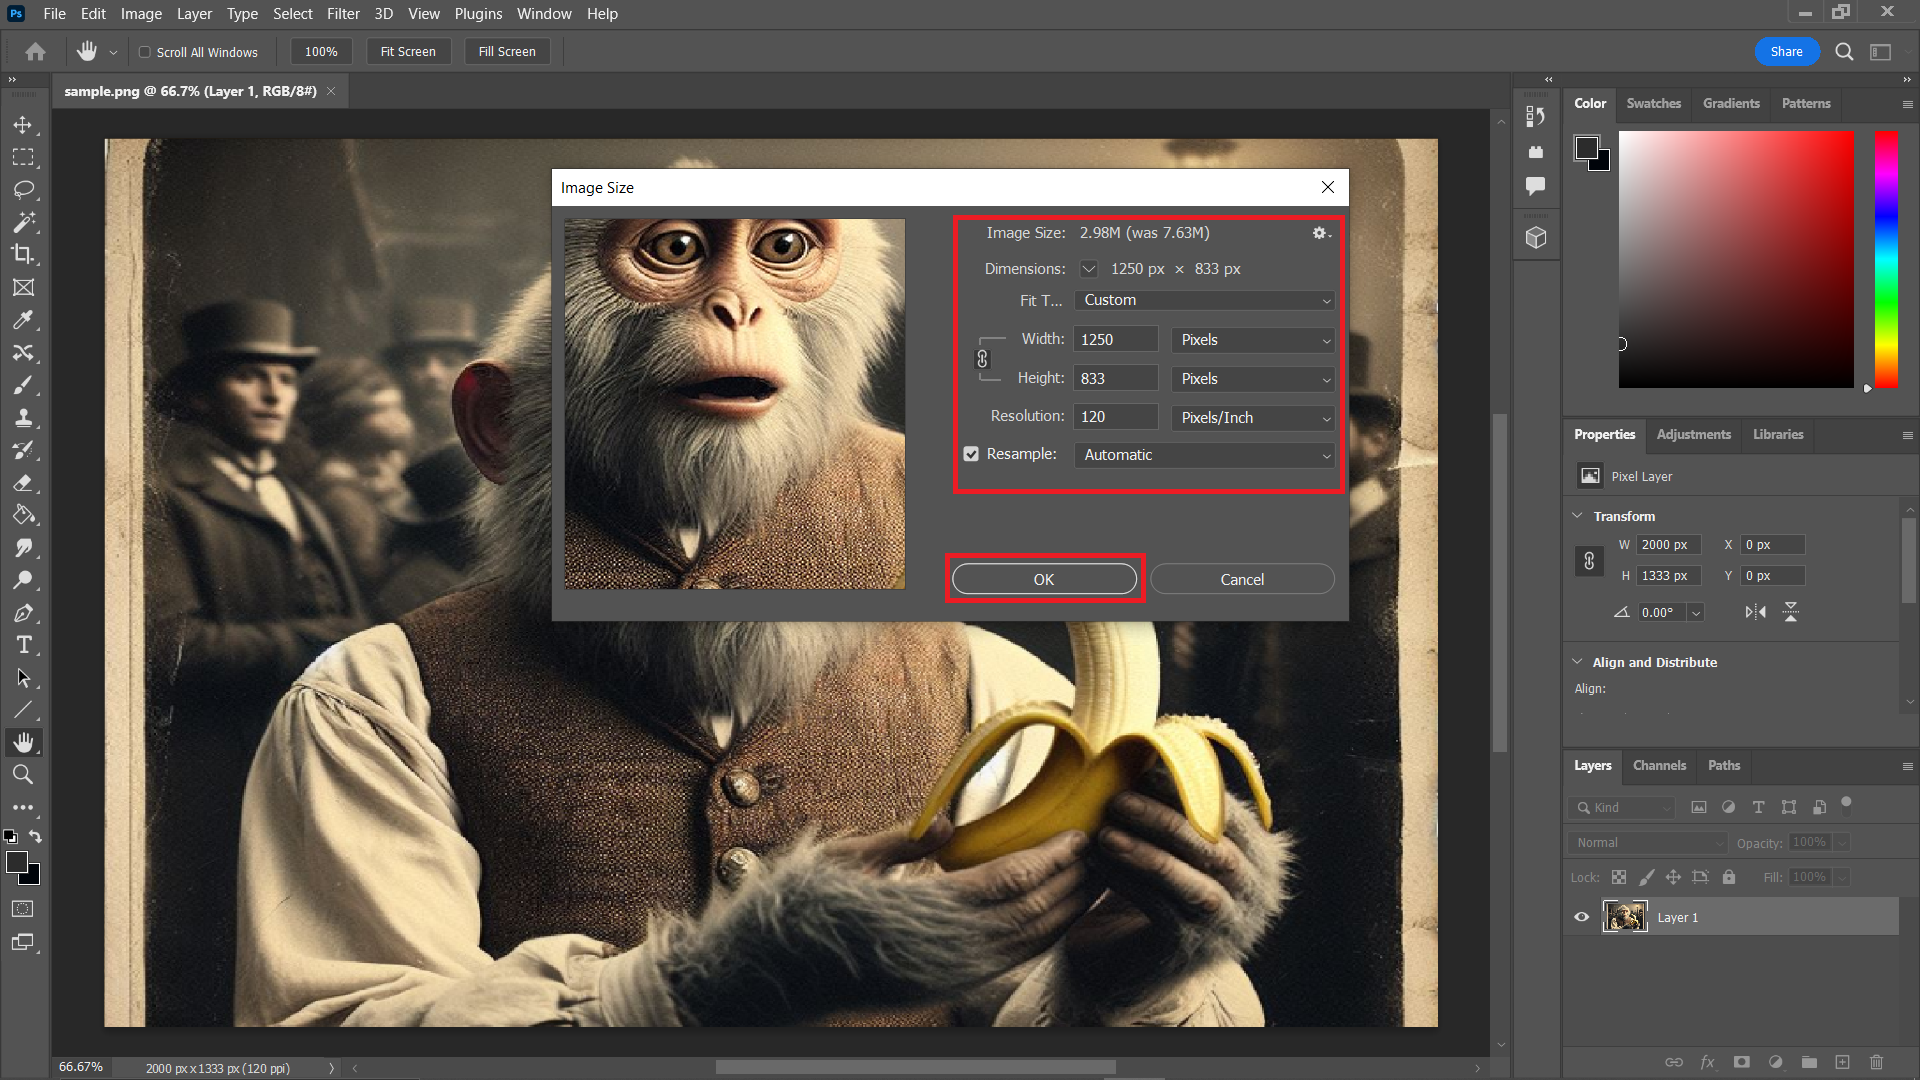 How To Install and Use Photoshop on Windows: Step 4